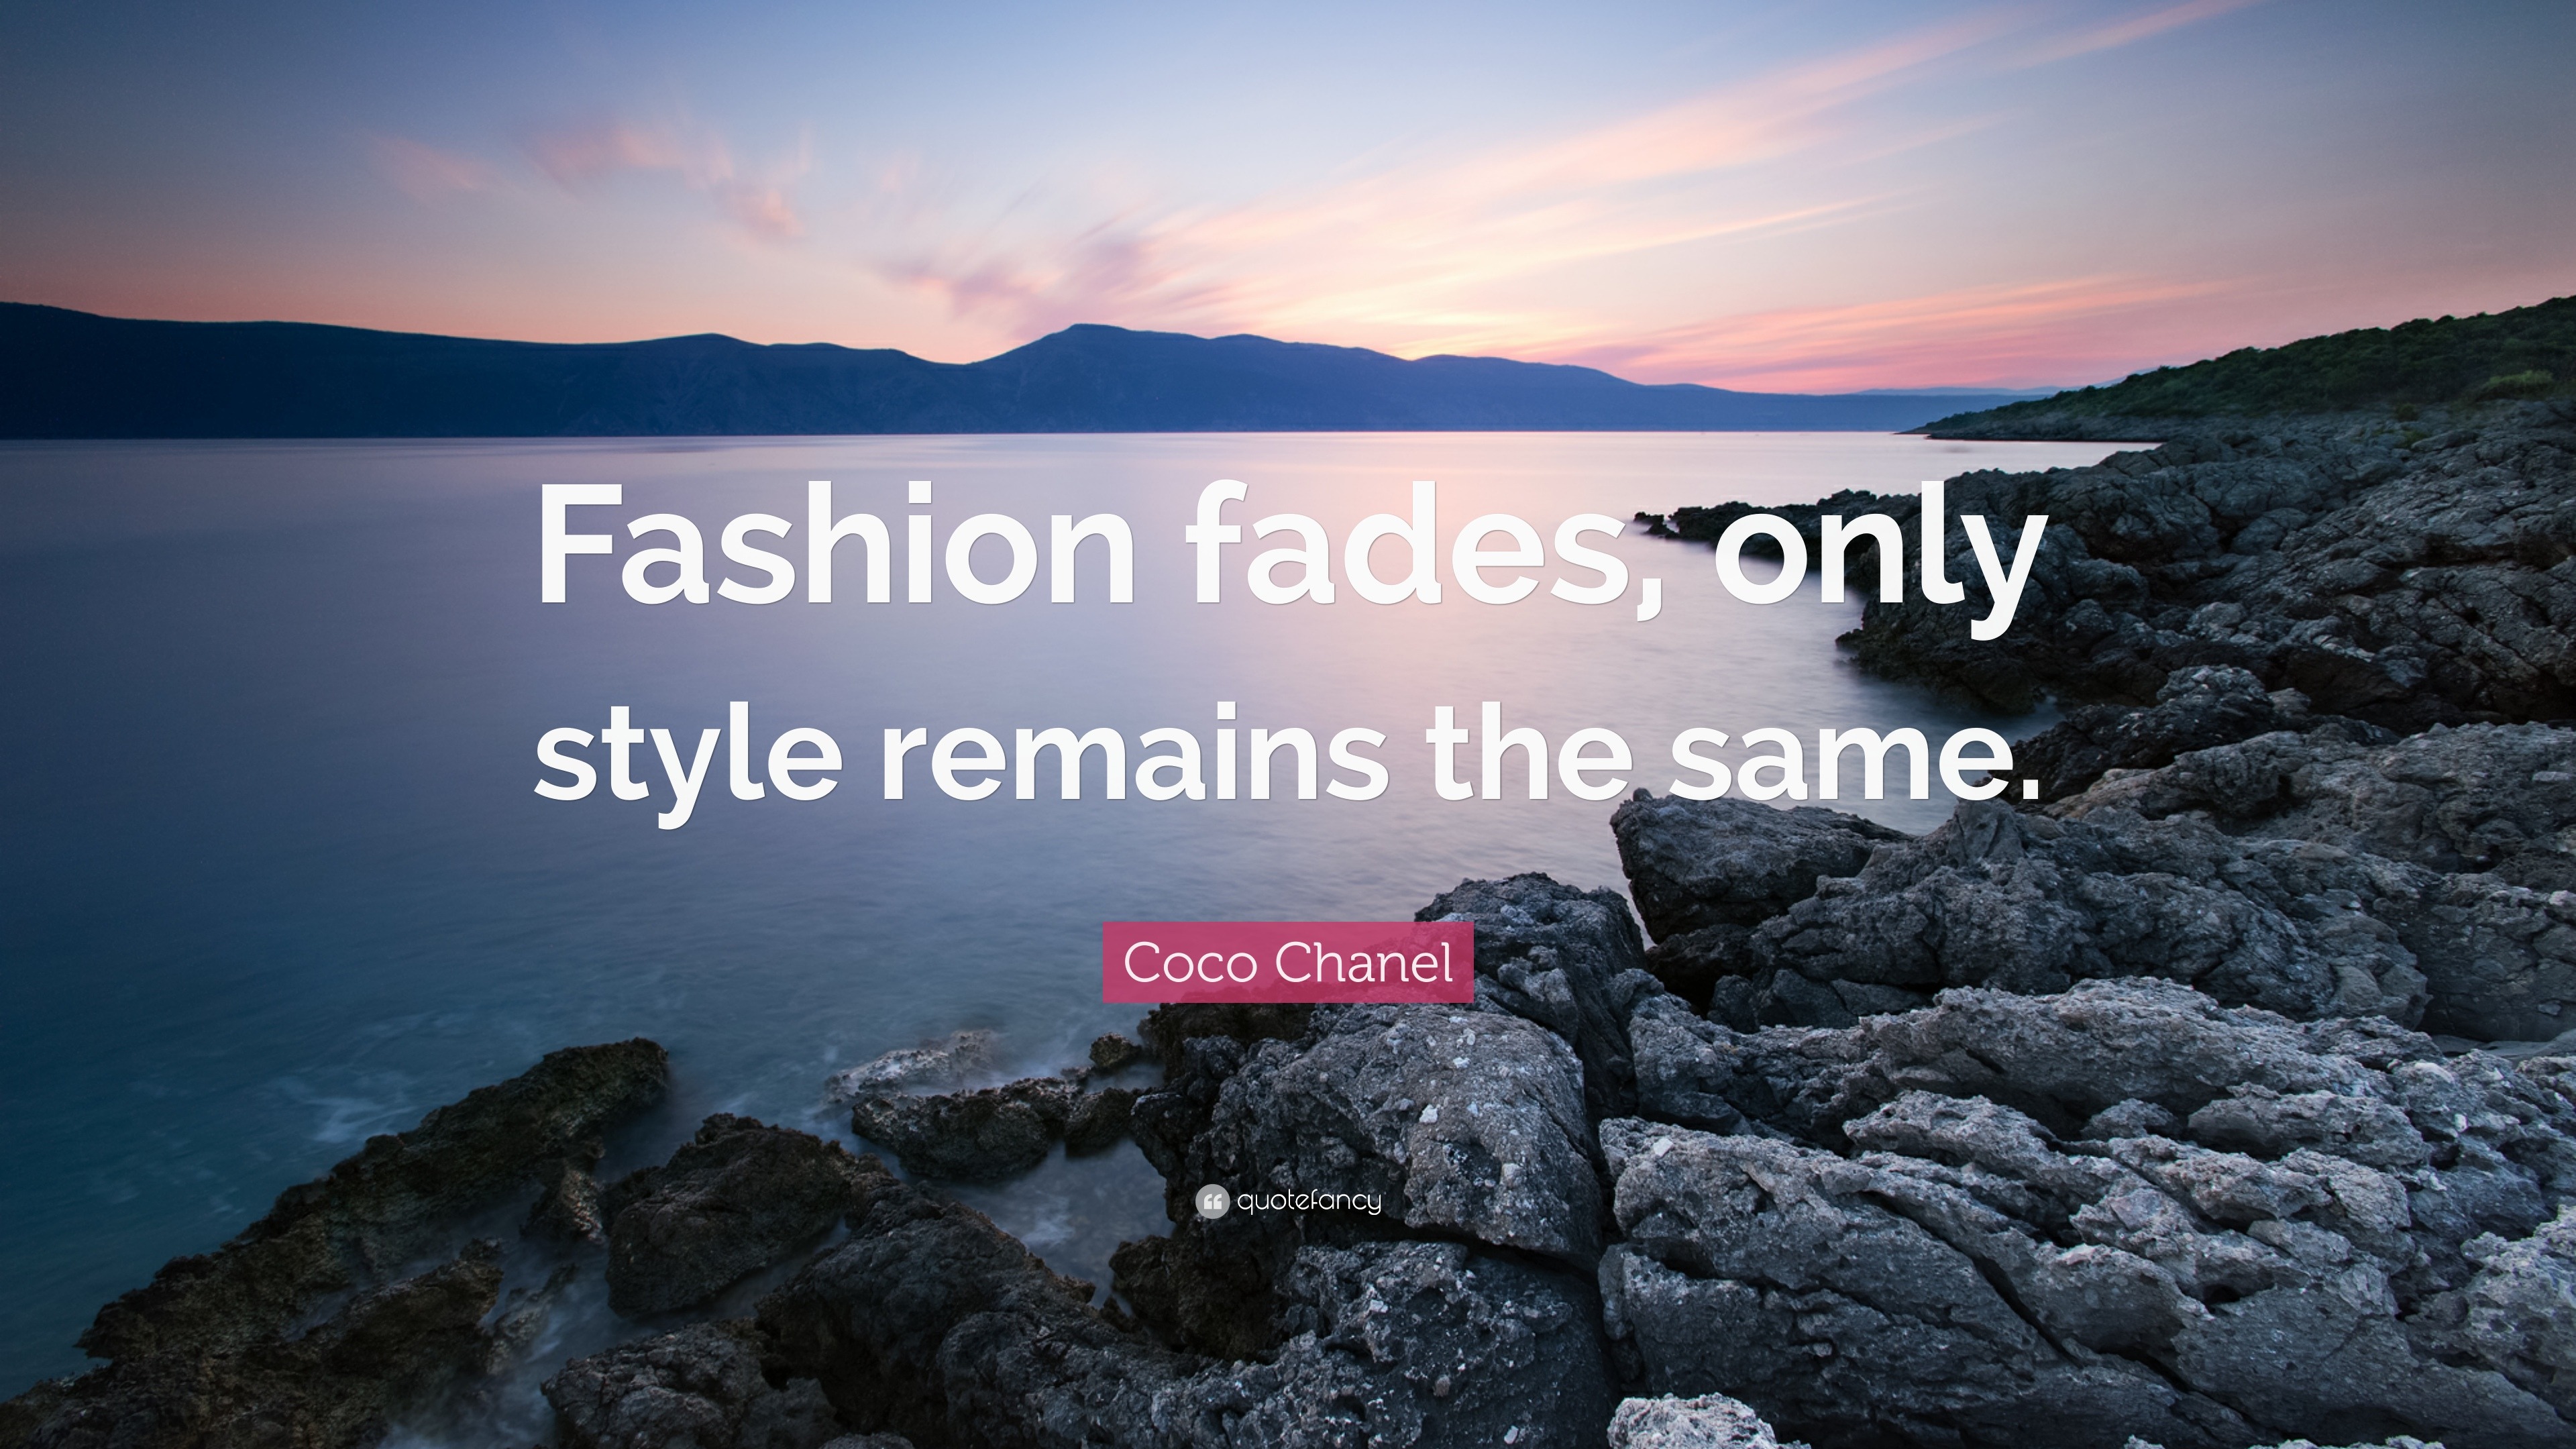 Fashion Fades, Only Style Remains the Same: How Coco Chanel